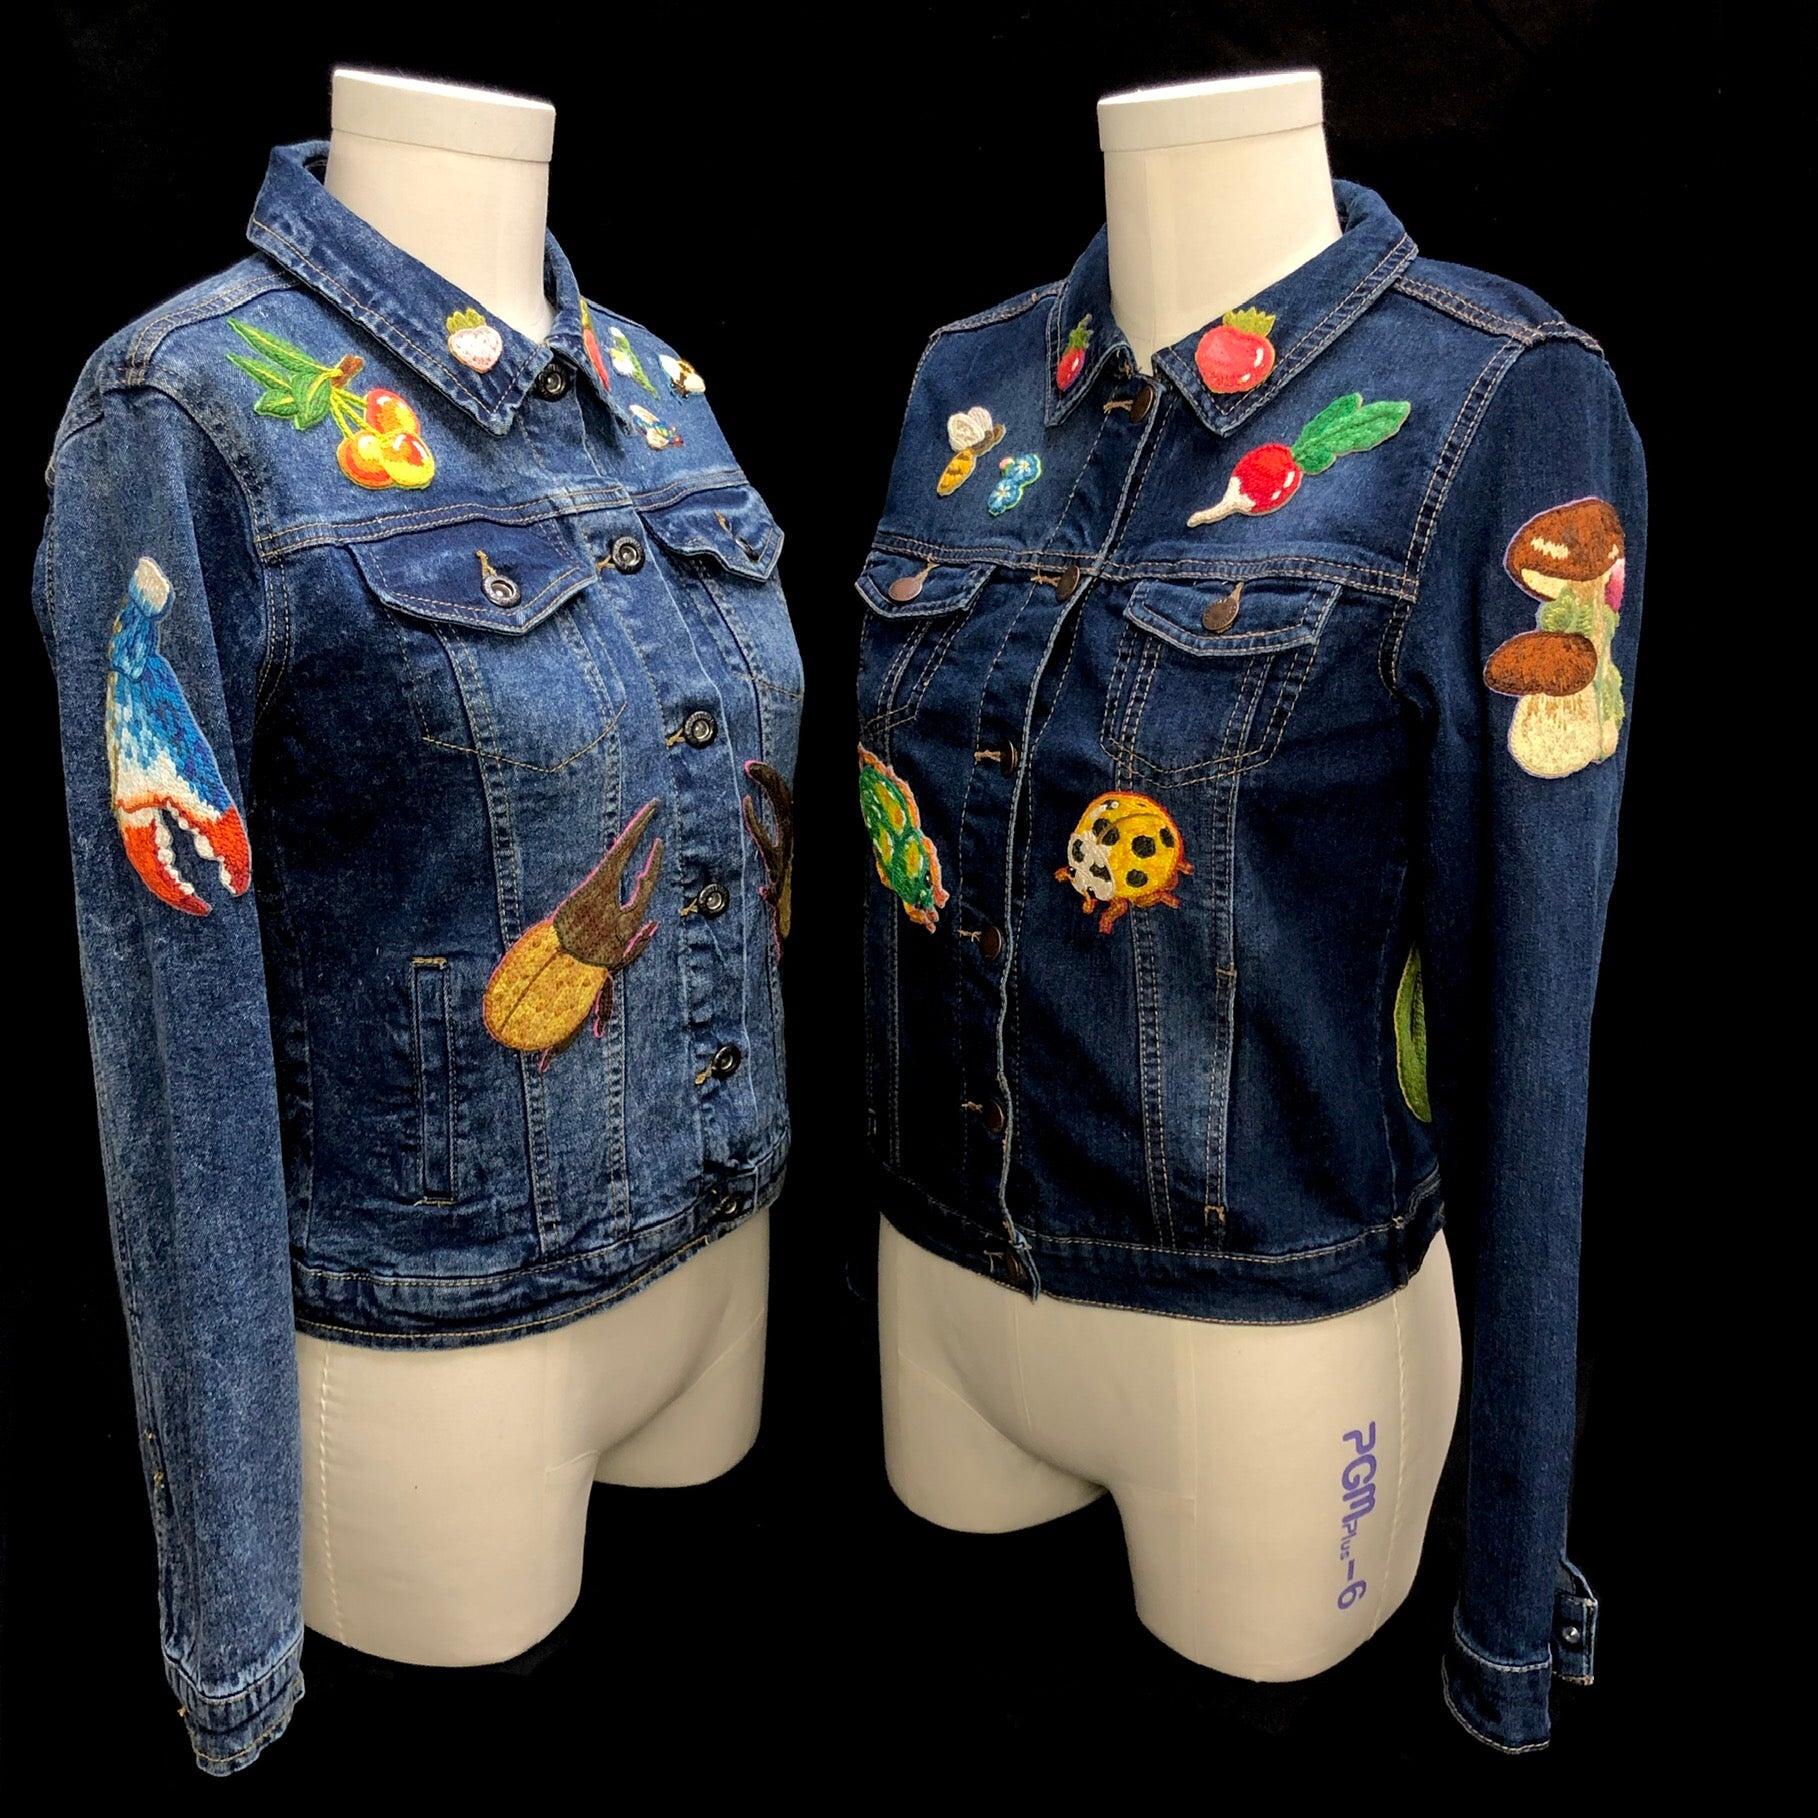 Beetle Jacket with Comet Moth Jacket to the right, both size small with different washes